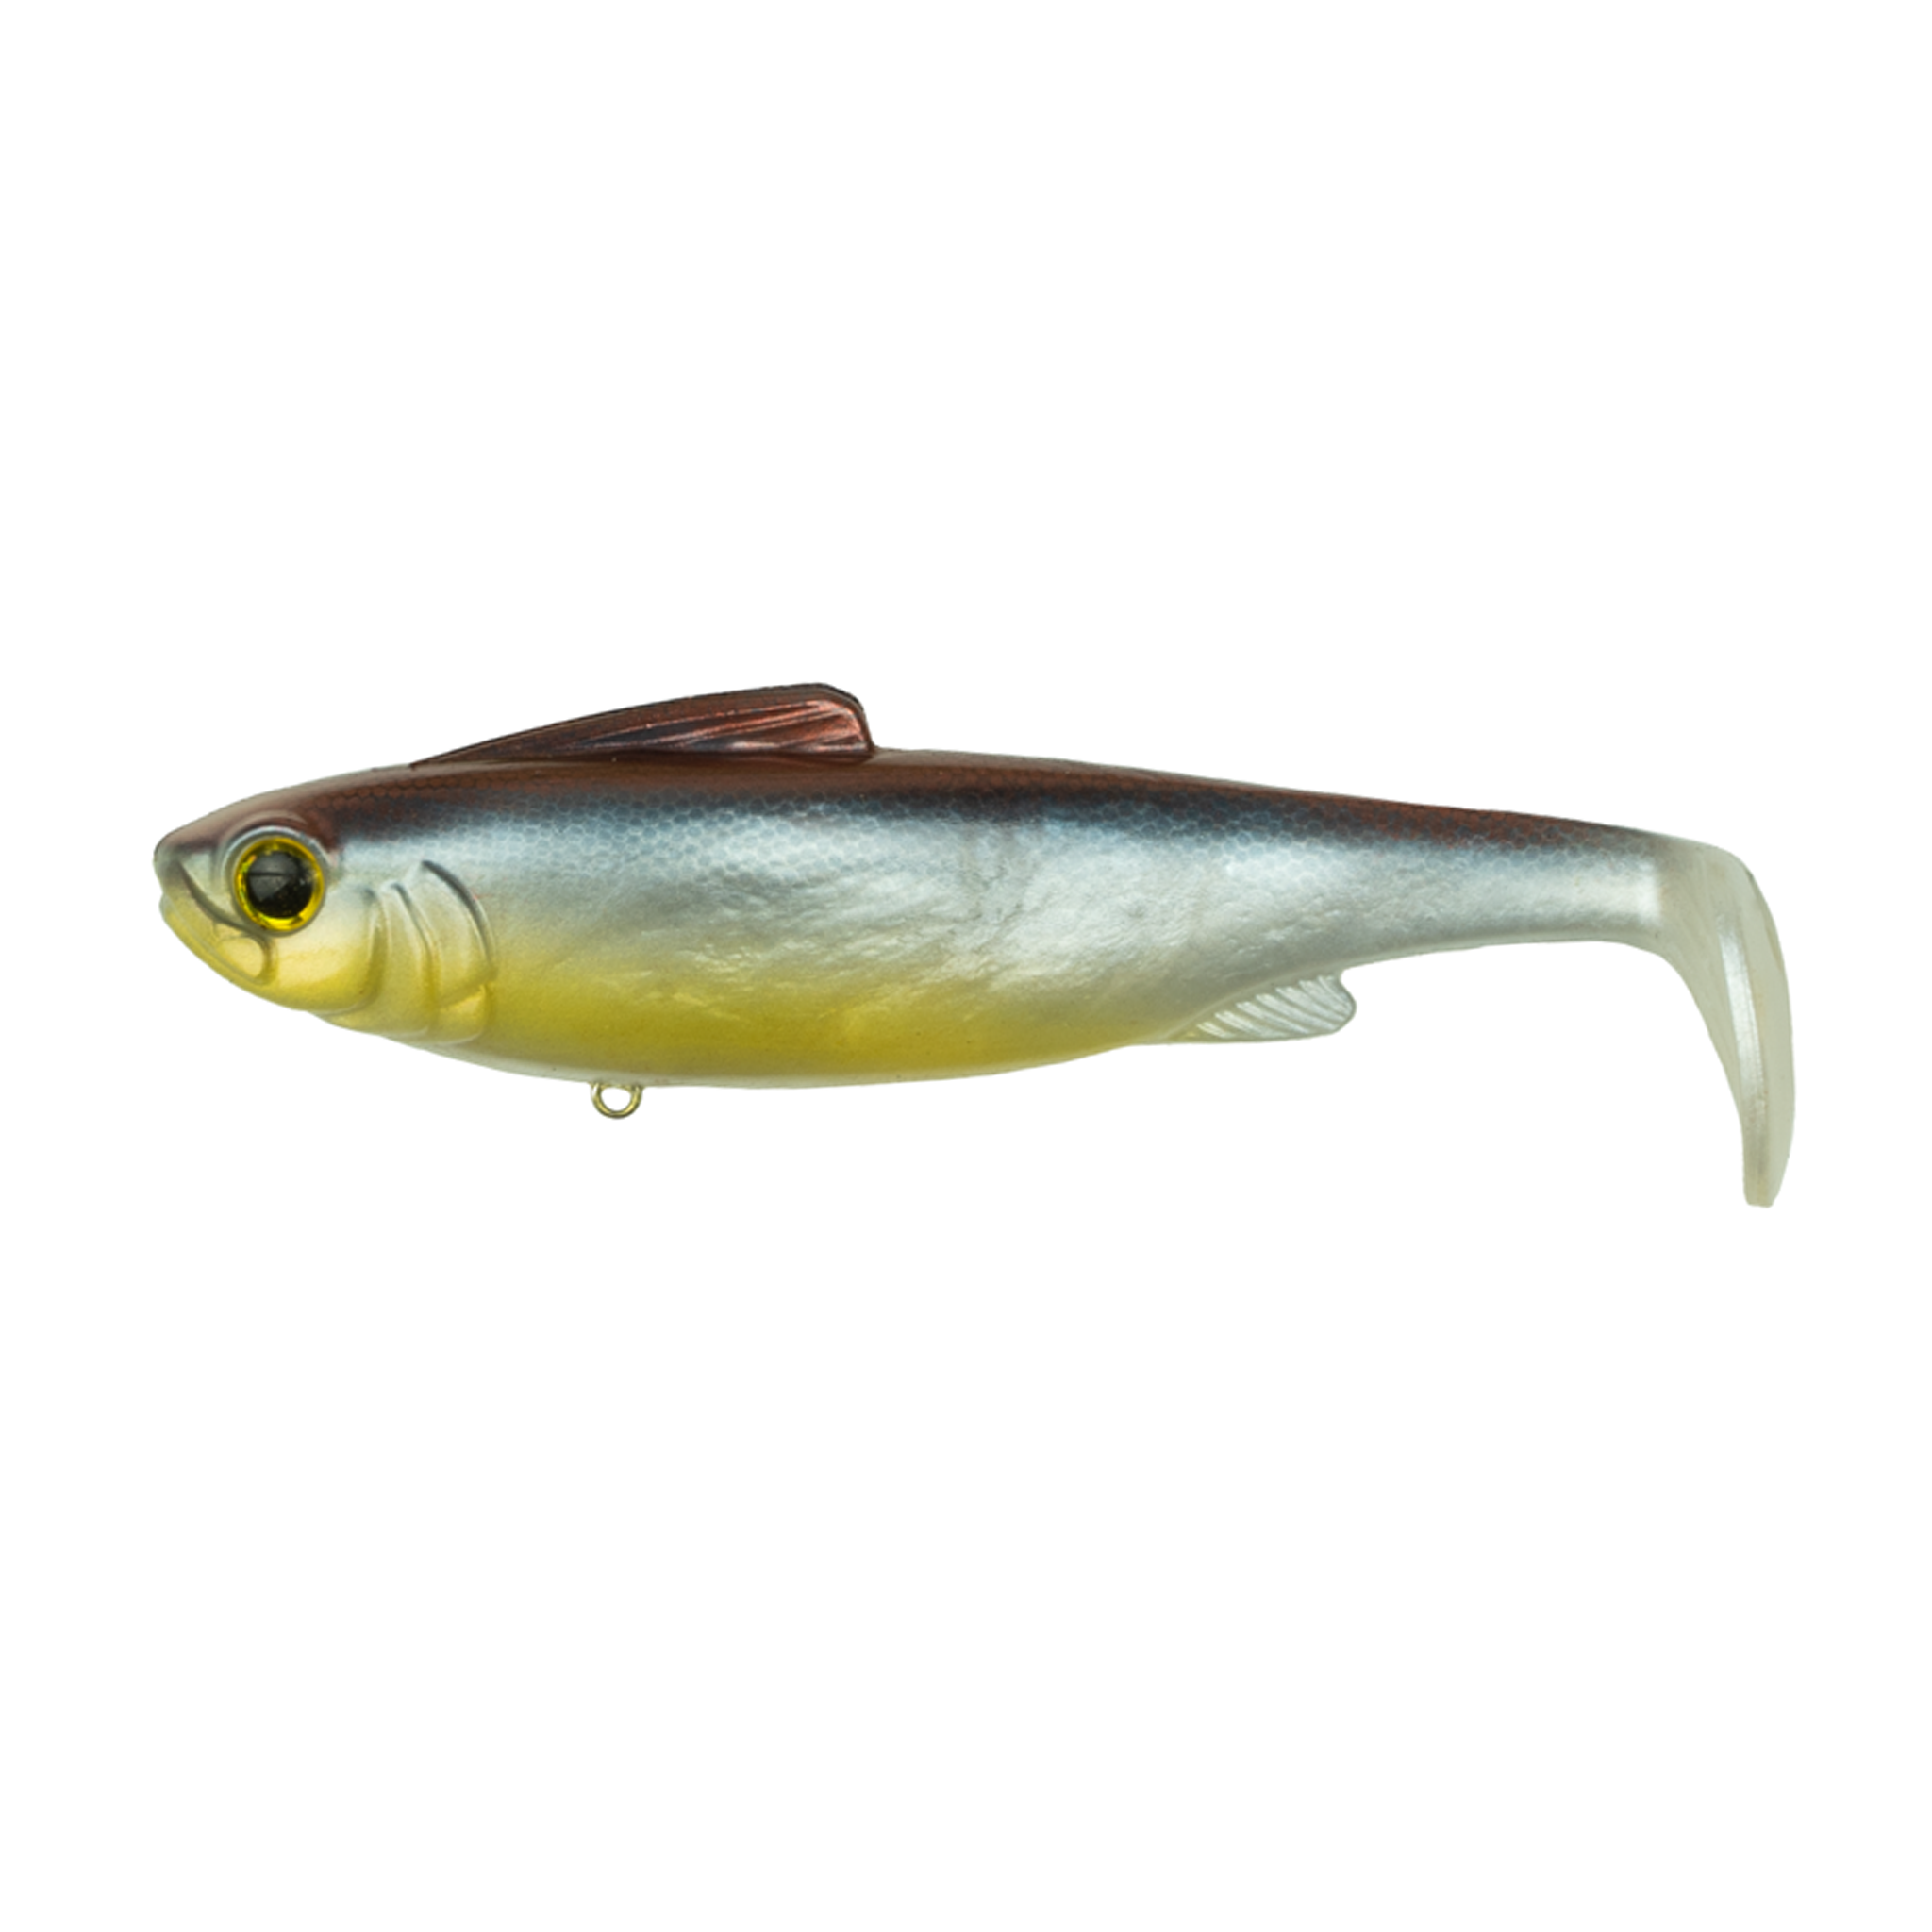 6th Sense Hangover Swimbait Review: The Ultimate Bass Fishing Game Changer?  